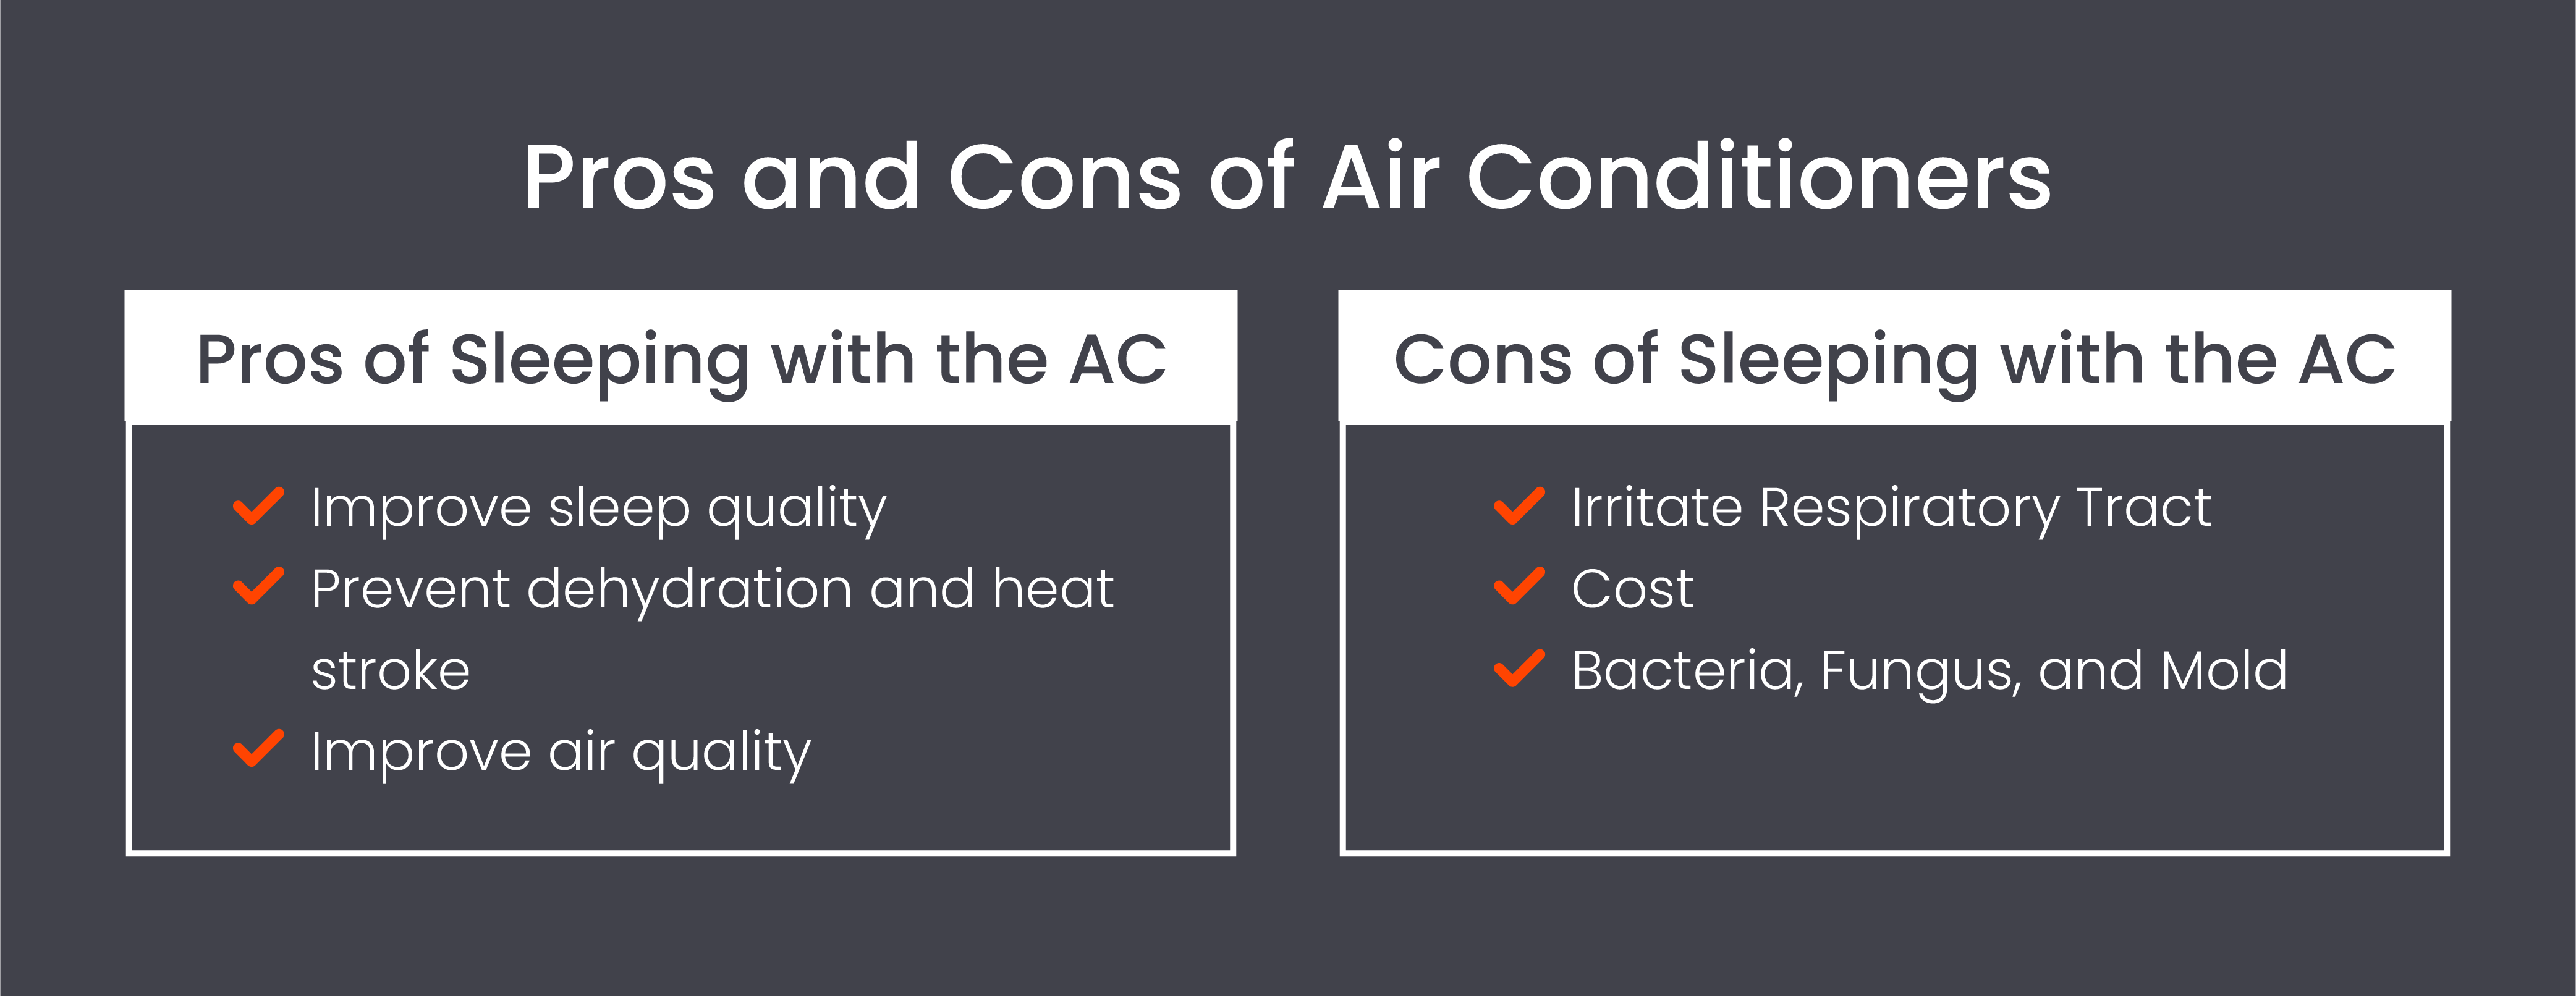 Pros and cons of air conditioners